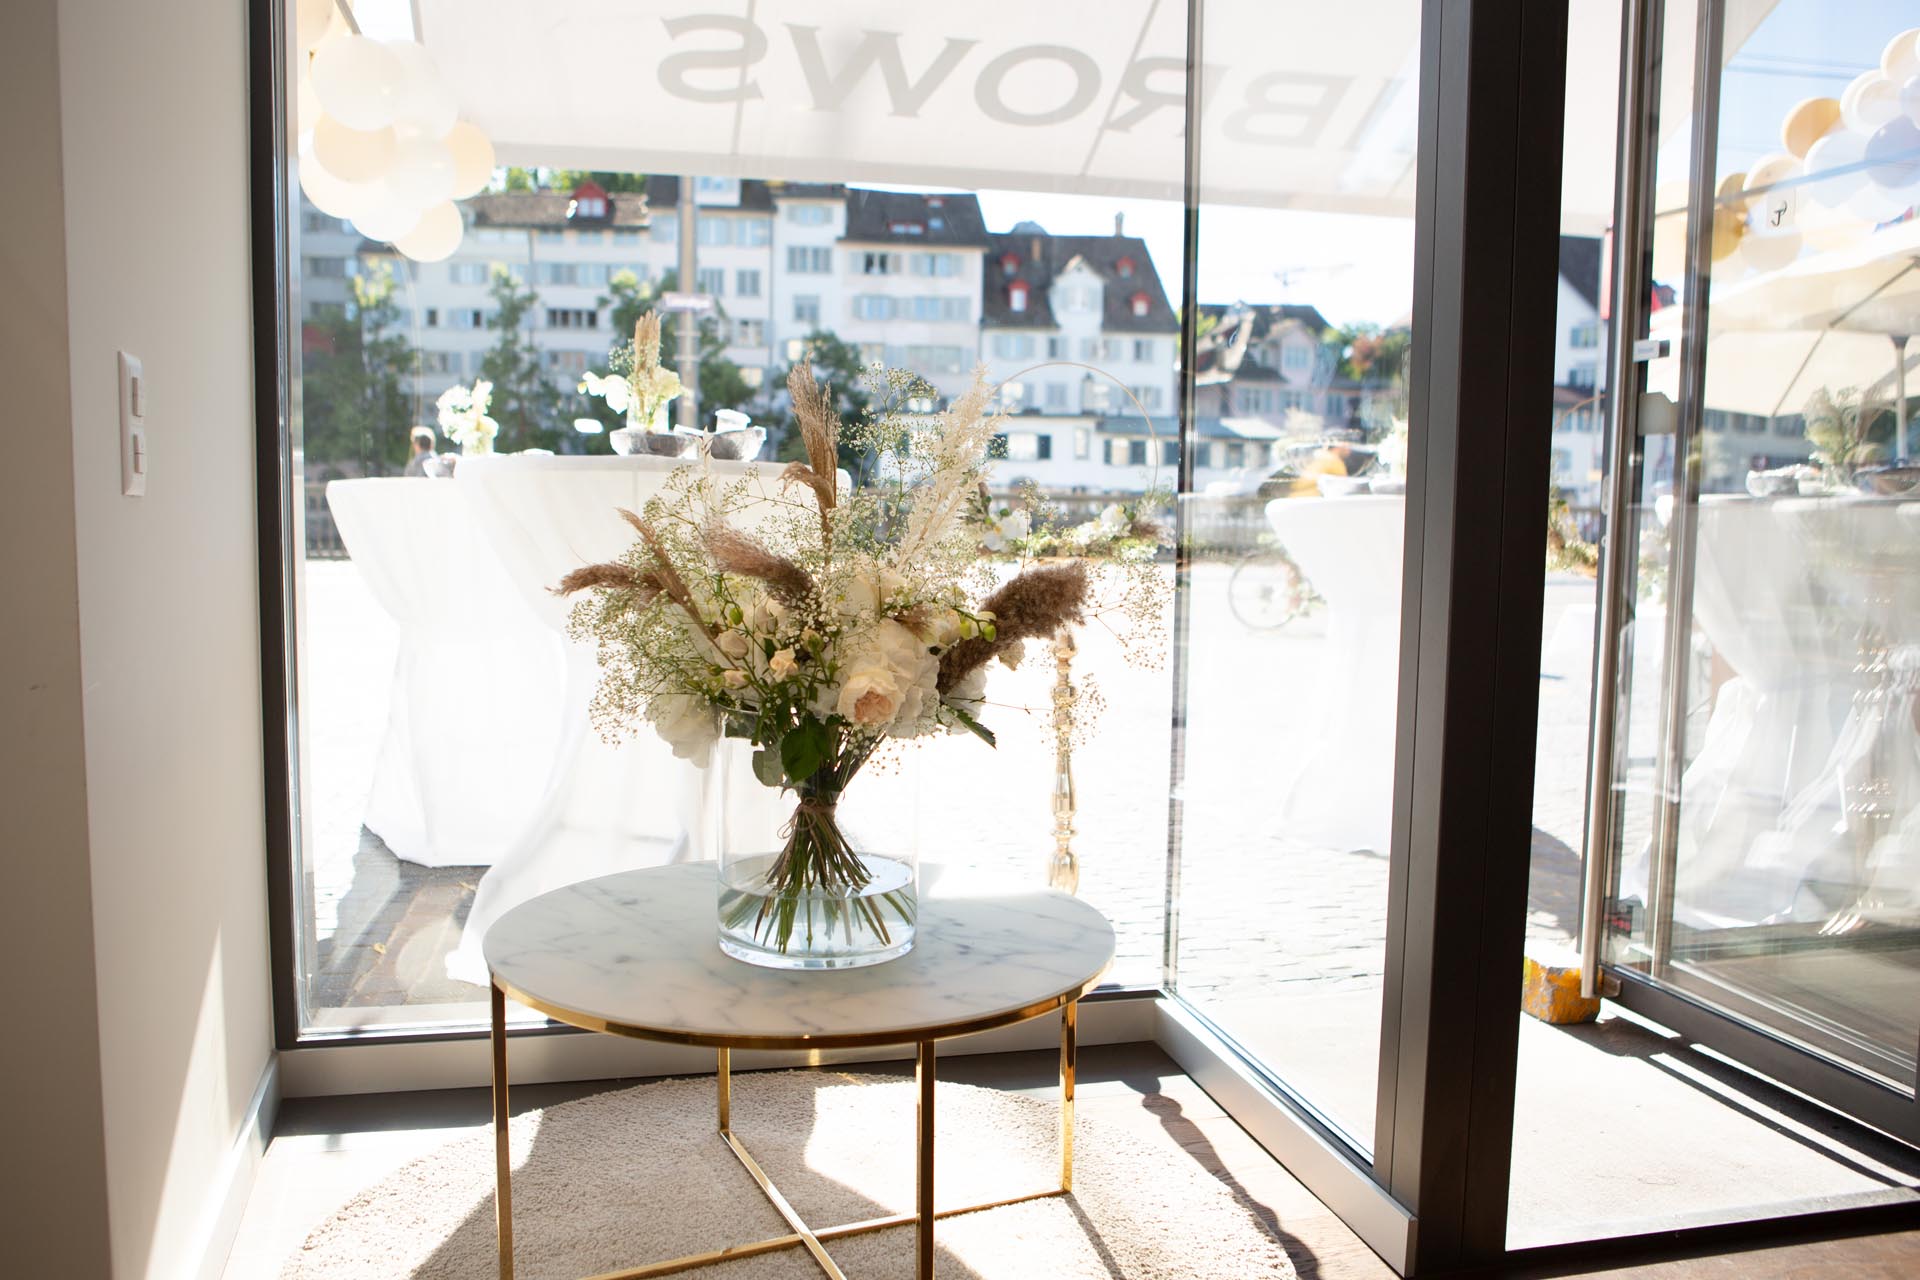 All White Summer Party, Flowers, Decoration, HIBROWS, Hibrows Zürich, Microblading, Summer Party, All White Party, Party Zurich, gold, white. Zürich, Switzerland | Lara Stähli, The Wedding Stories, Wedding Planning, Event Planning, Planer